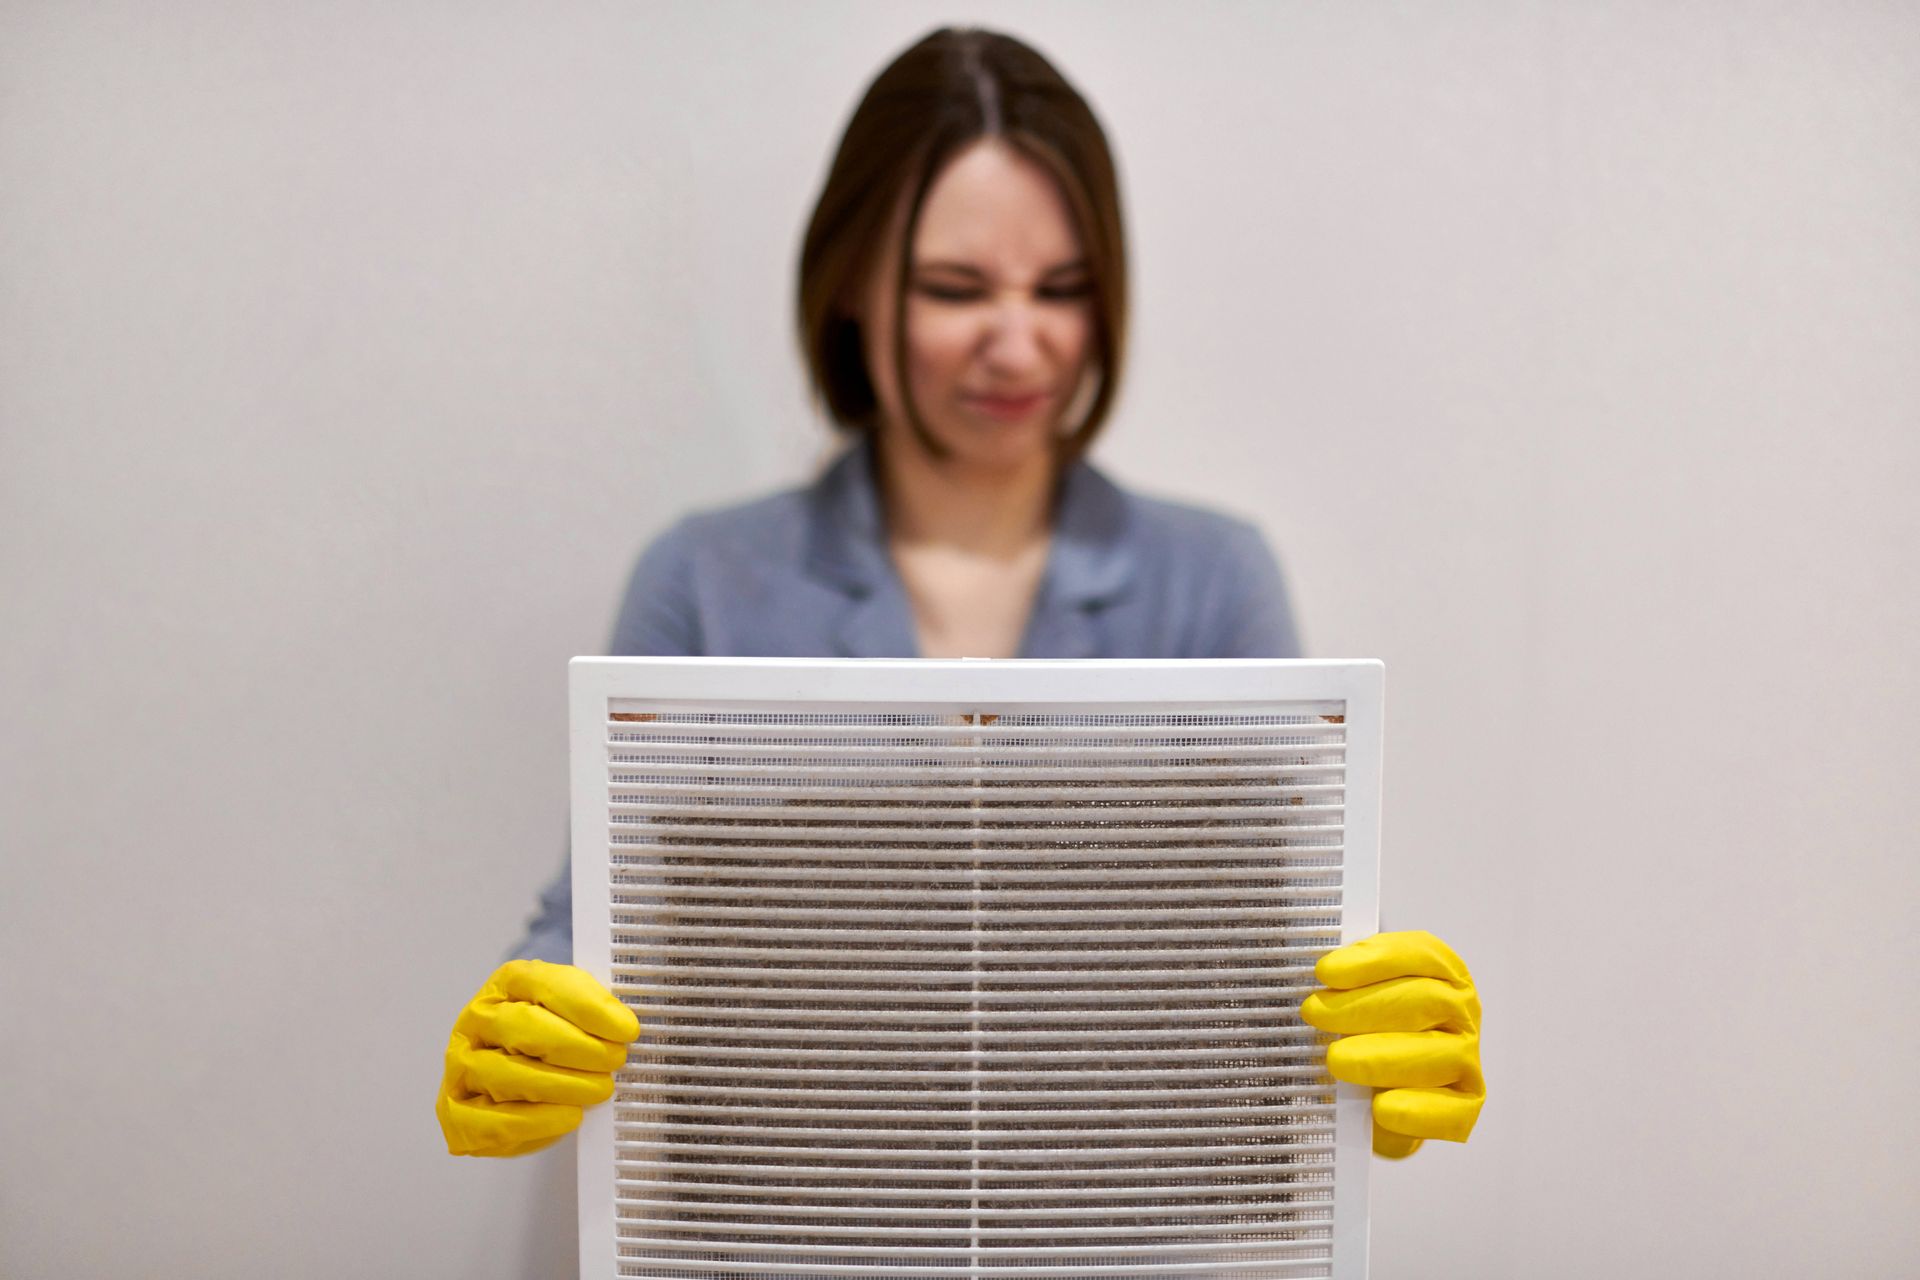 Low-Quality Air Filters Can Be Harmful Moberly, MO Homes. Call Controlled Aire for Help Today!